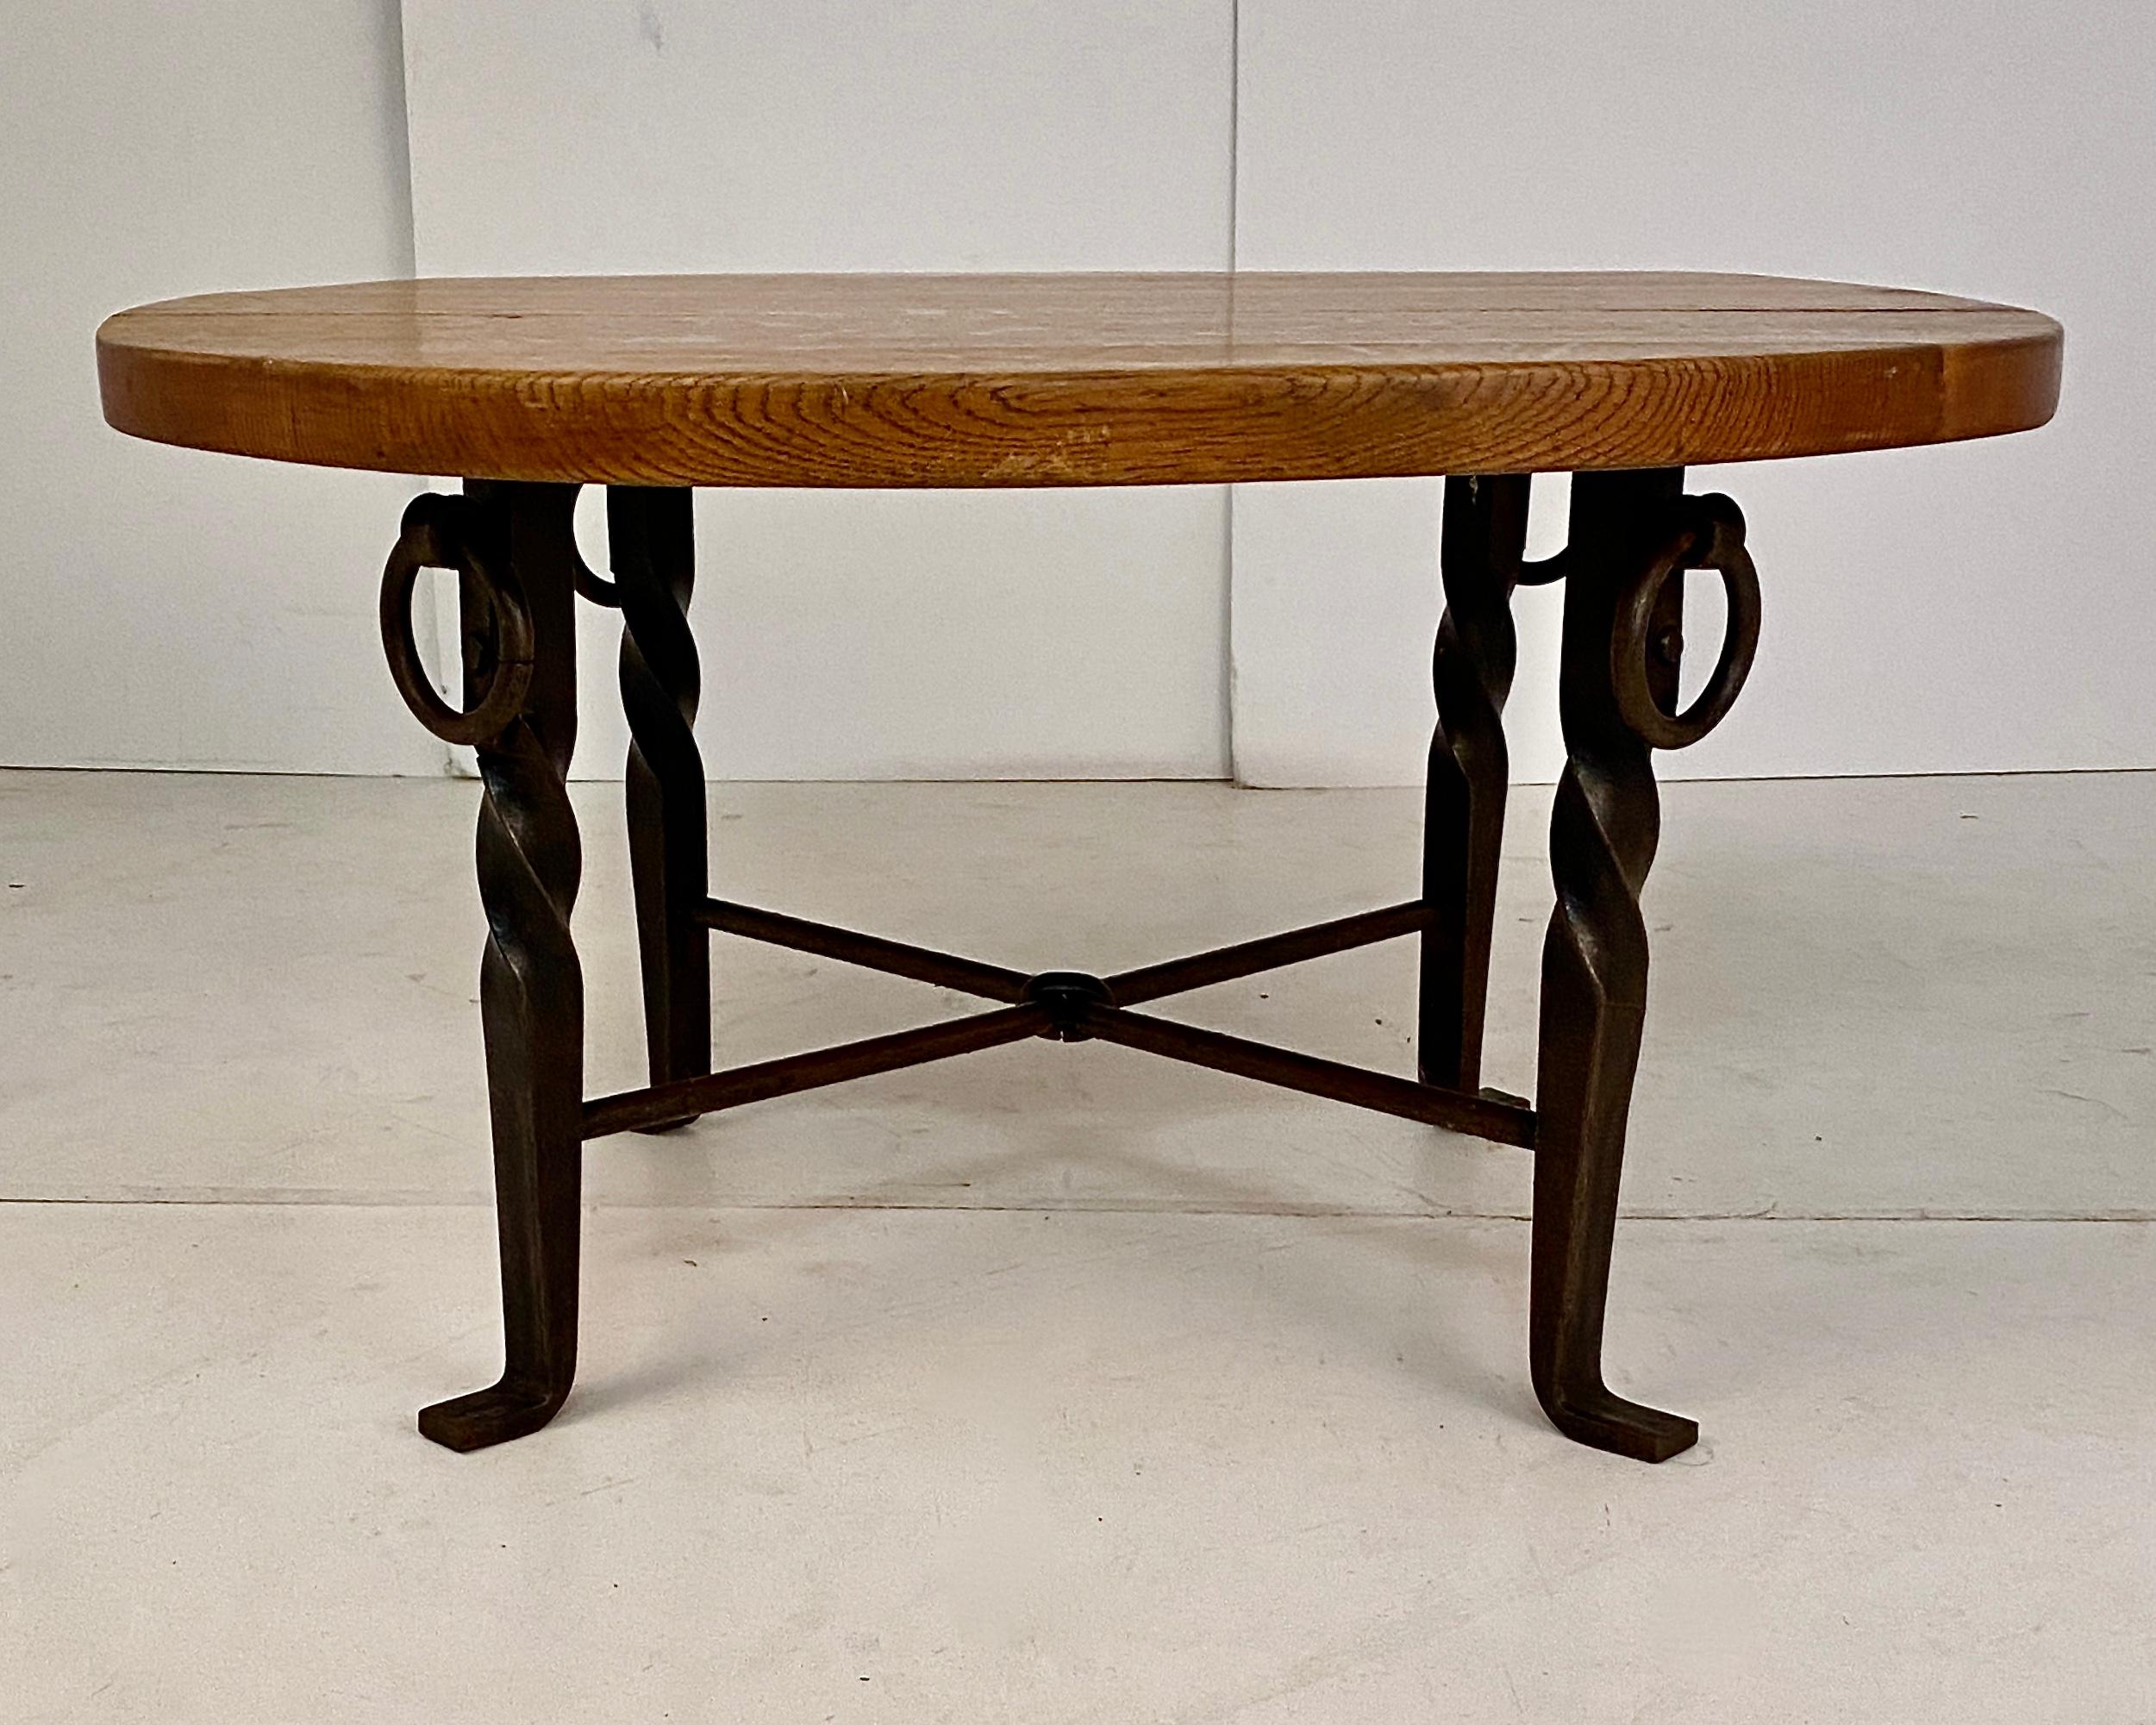 Very fine quality table featuring an iron ring stretcher and a heavy oak top. Lovely patina and color. Just slightly off round , 31.5